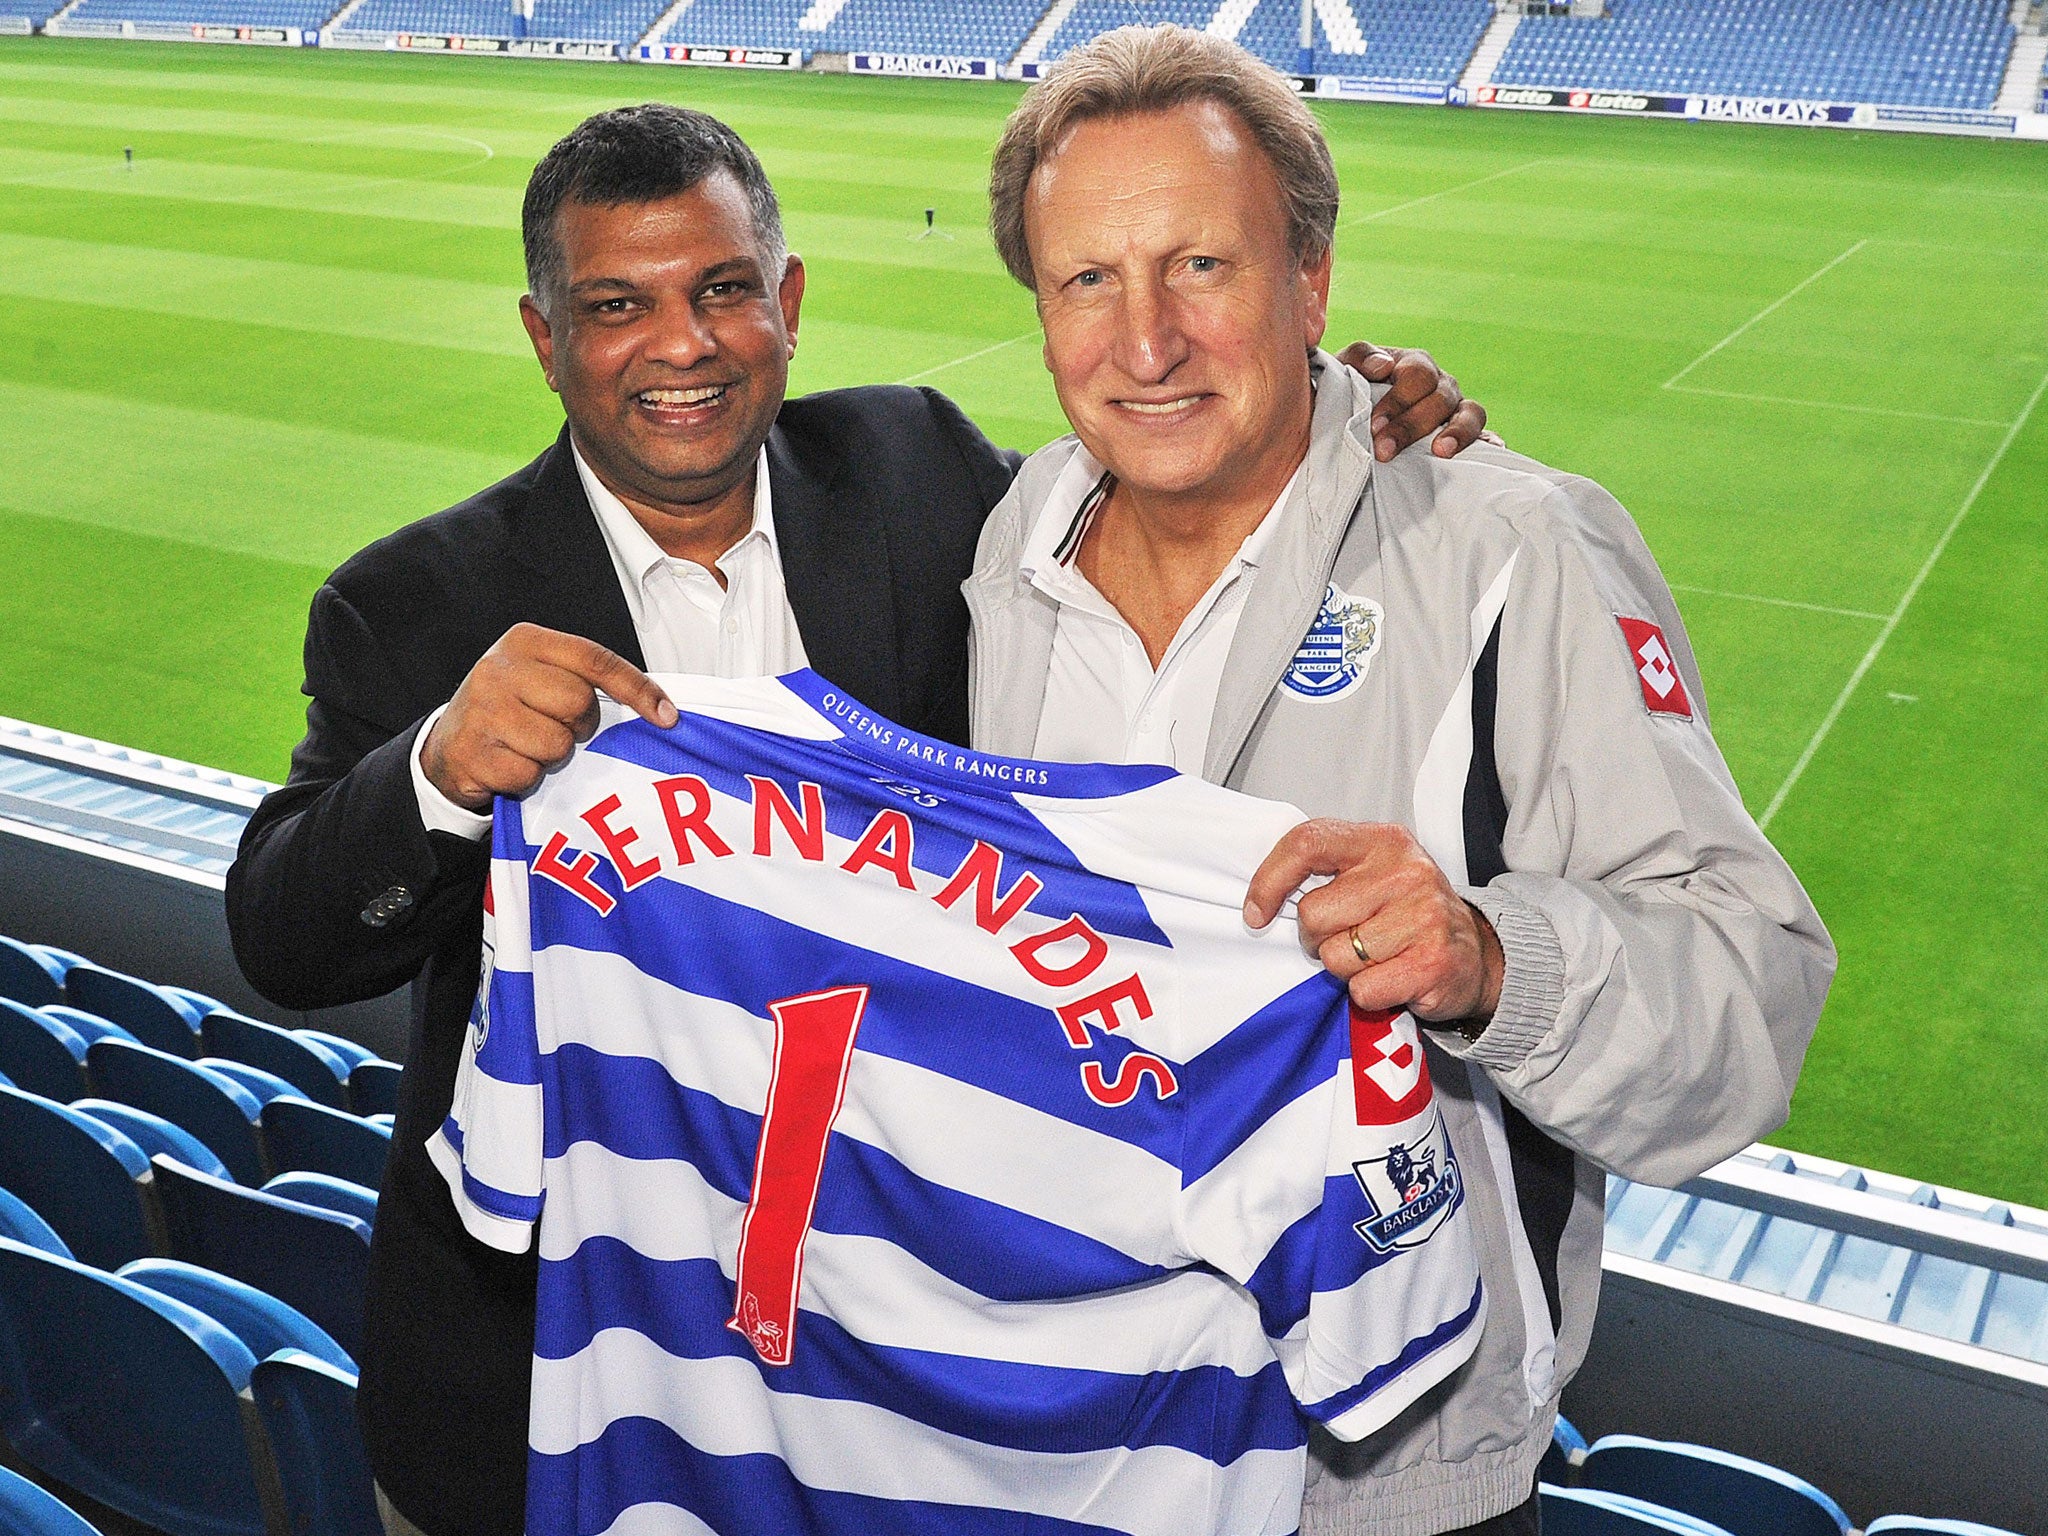 Tony Fernandes joins me at QPR, where I was not his personal No 1 choice